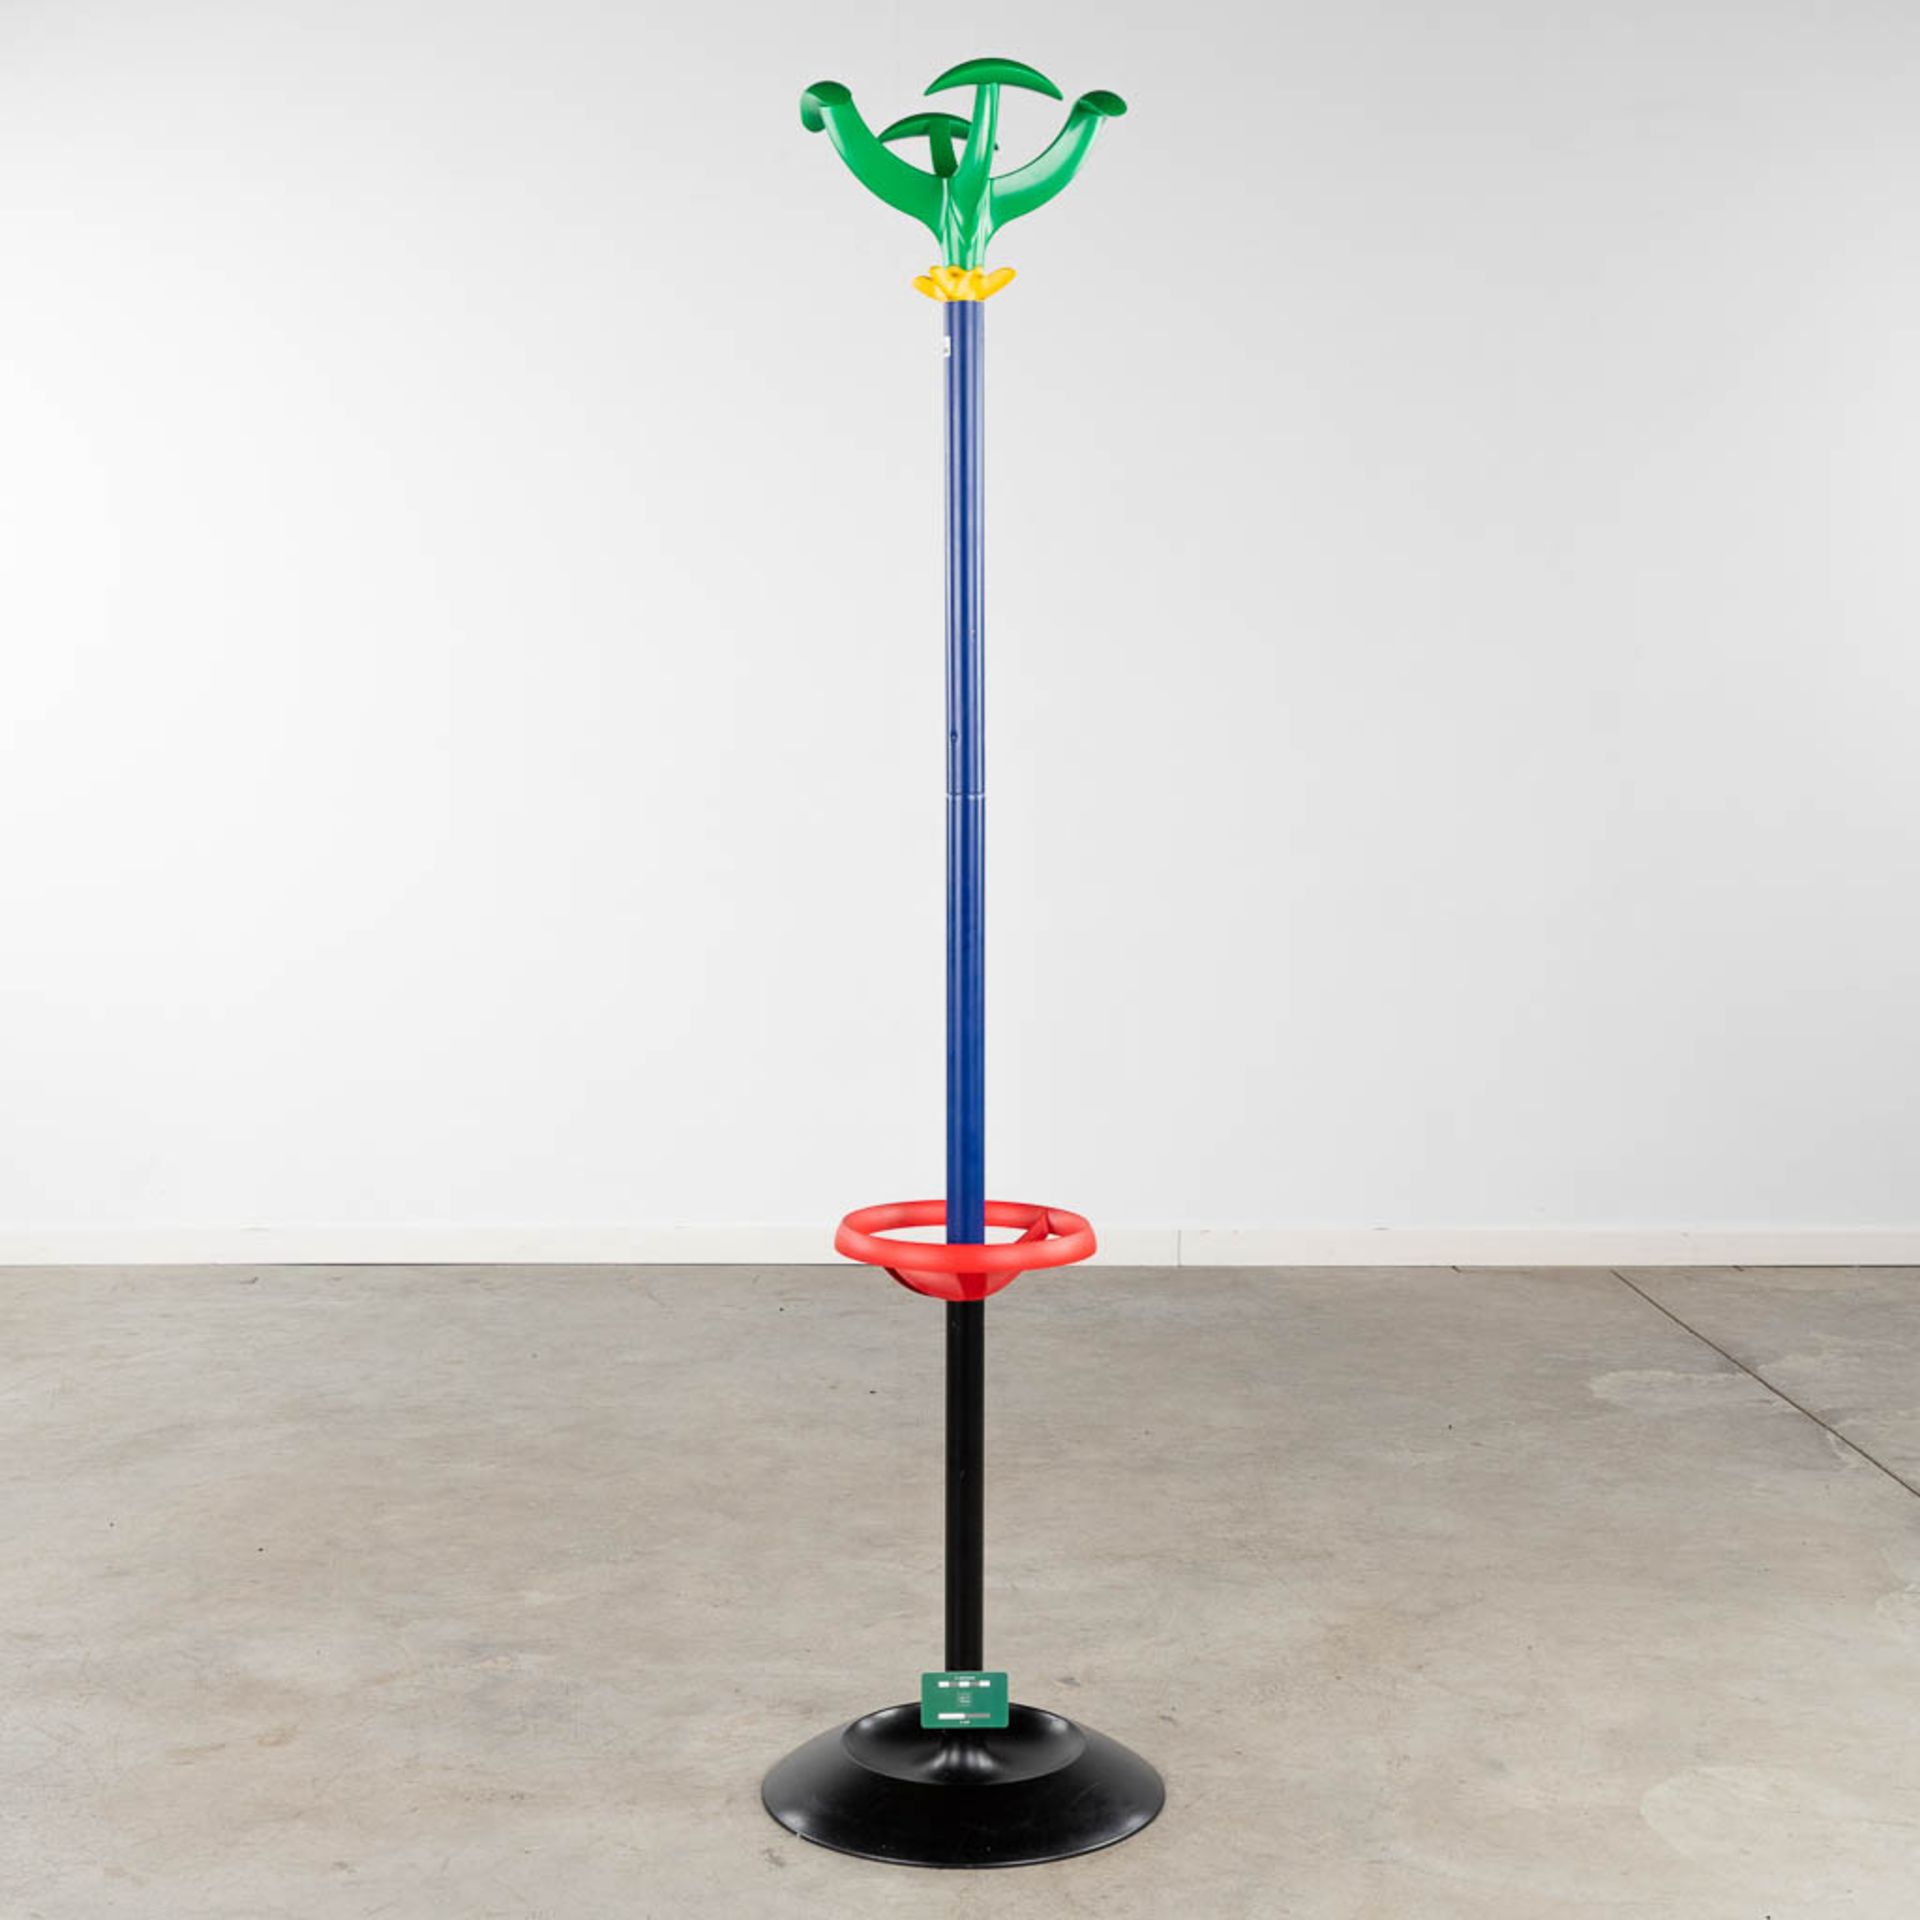 Raul BARBIERI (1946) 'Cactus' for Rexite, a coathanger. (H:165 x D:40 cm) - Image 2 of 13